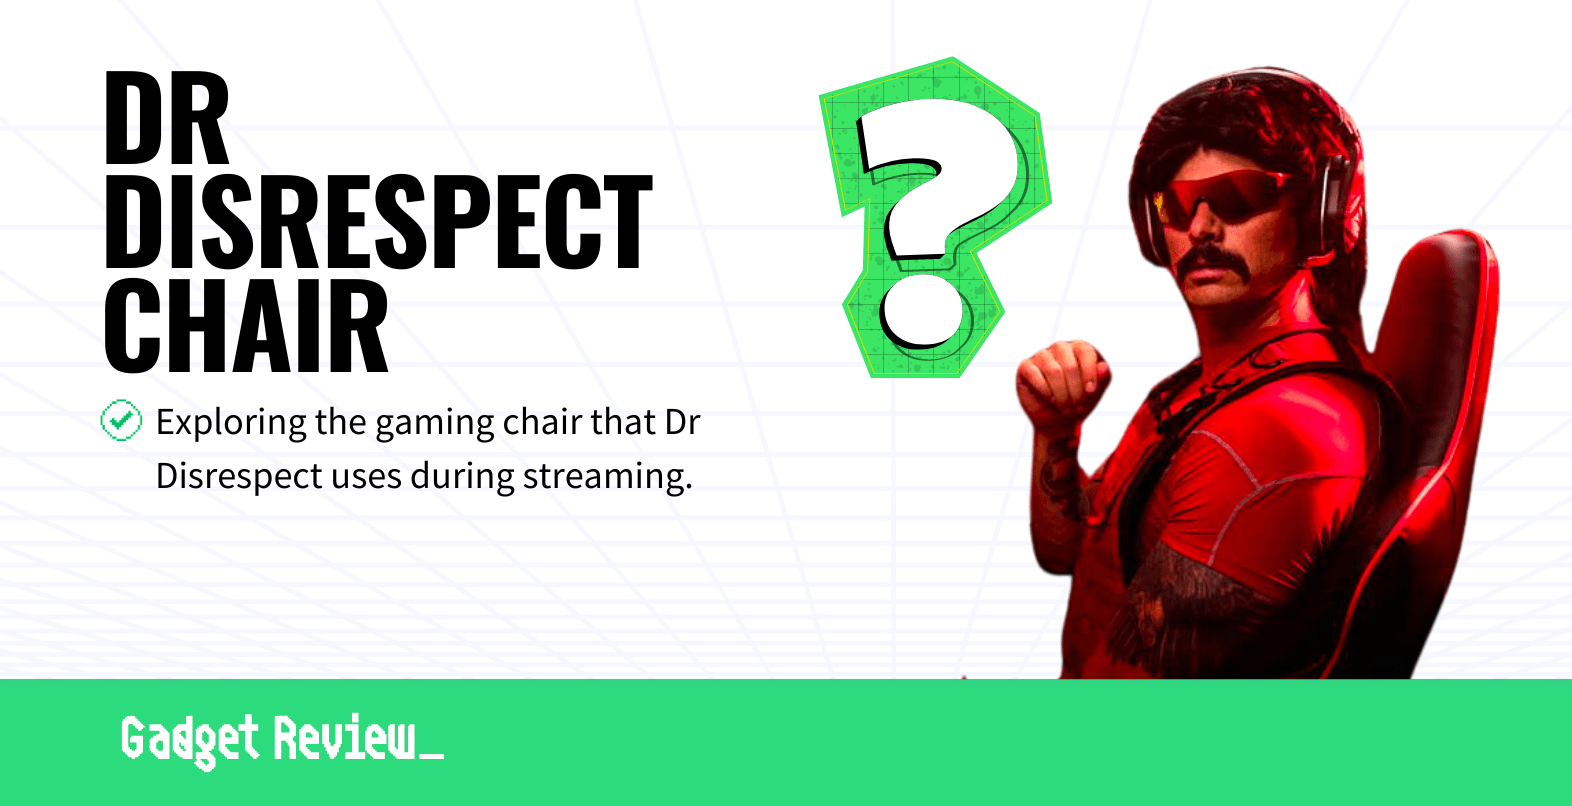 What Gaming Chair Does Doc Use